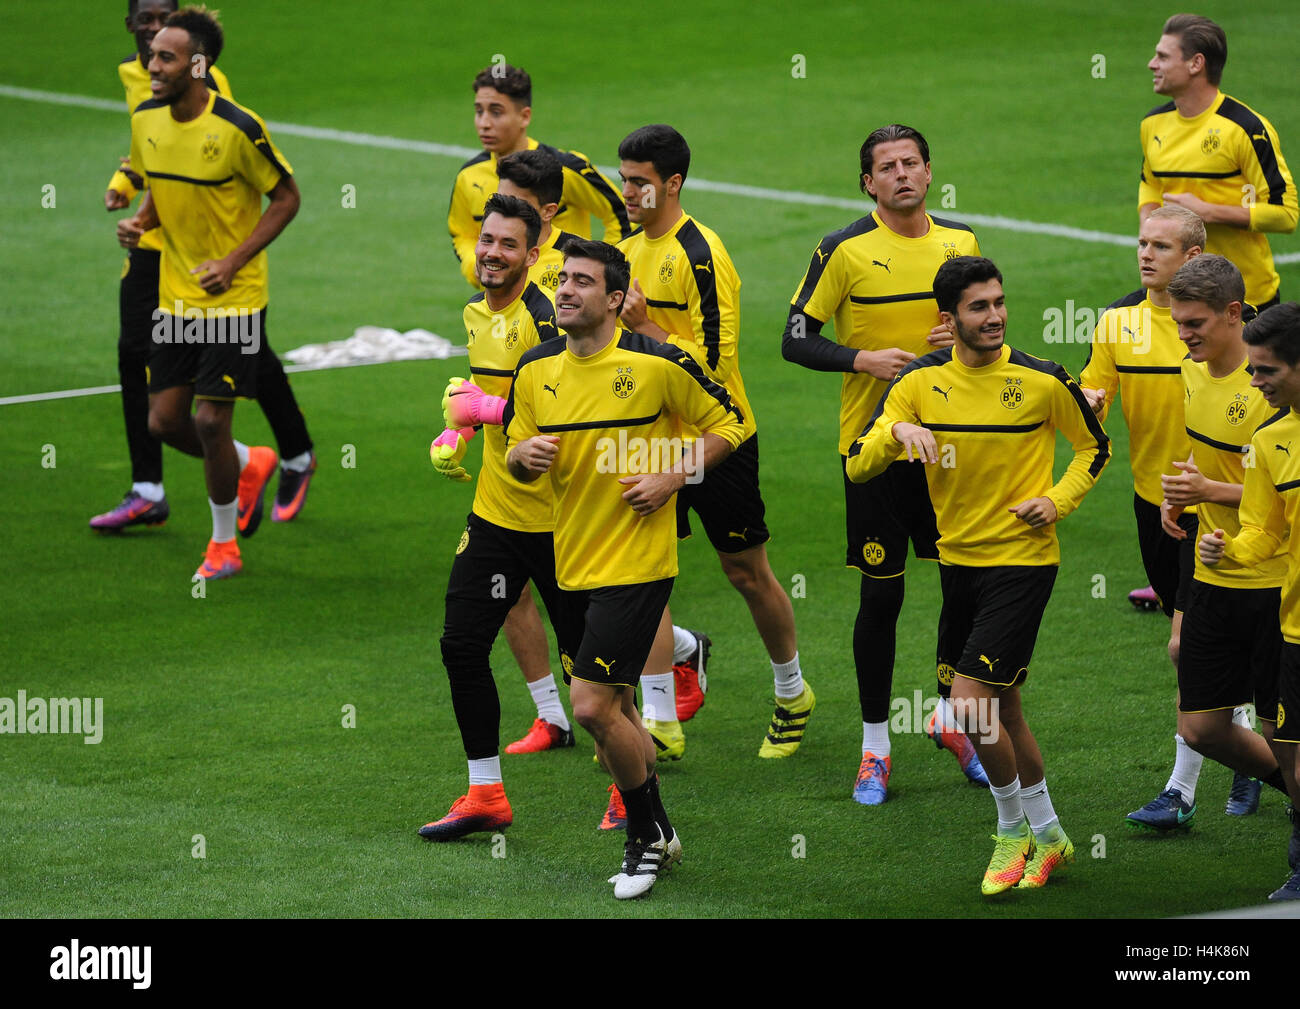 Borussia Dortmund's Pierre-Emerick Aubameyang, Lukasz Piszczek, goalkeeper Roman Burki and Socrates Papastathopoulos in action during a training session at Jose Alvalade stadium in Lisbon, Portugal, on 17 October 2016. Borussia Dortmund will face Sporting Lisbon in the UEFA Champions League Group F soccer match on 18 October 2016. Photo: Paulo Duarte/dpa Stock Photo